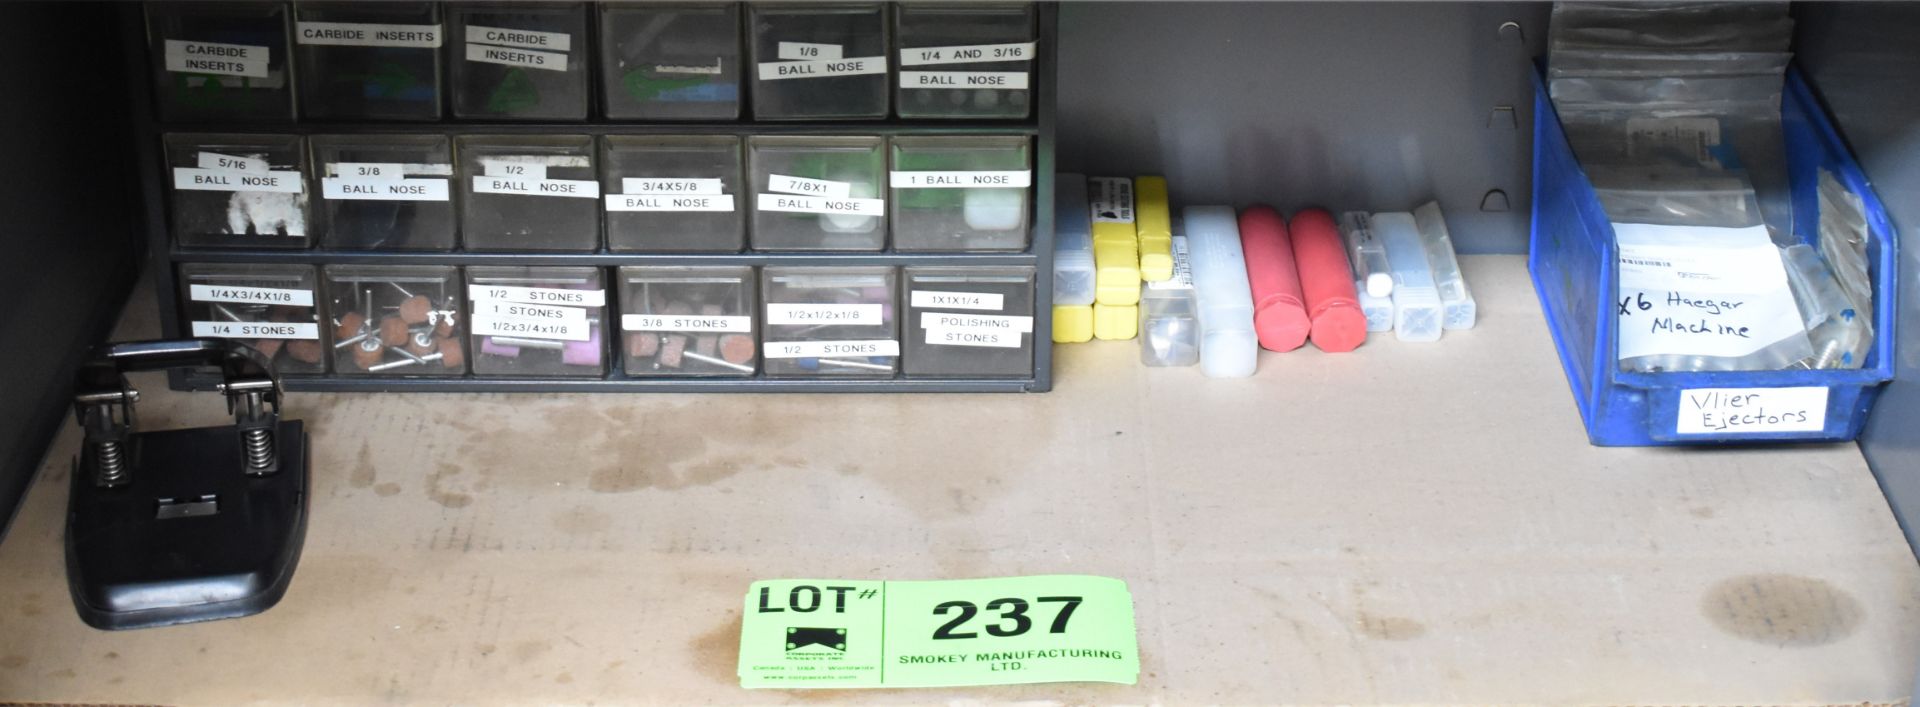 LOT/ CONTENTS OF SHELF - EJECTOR PINS, SANDING PERISHABLES, BALL NOSE END MILLS, CARBIDE INSERTS